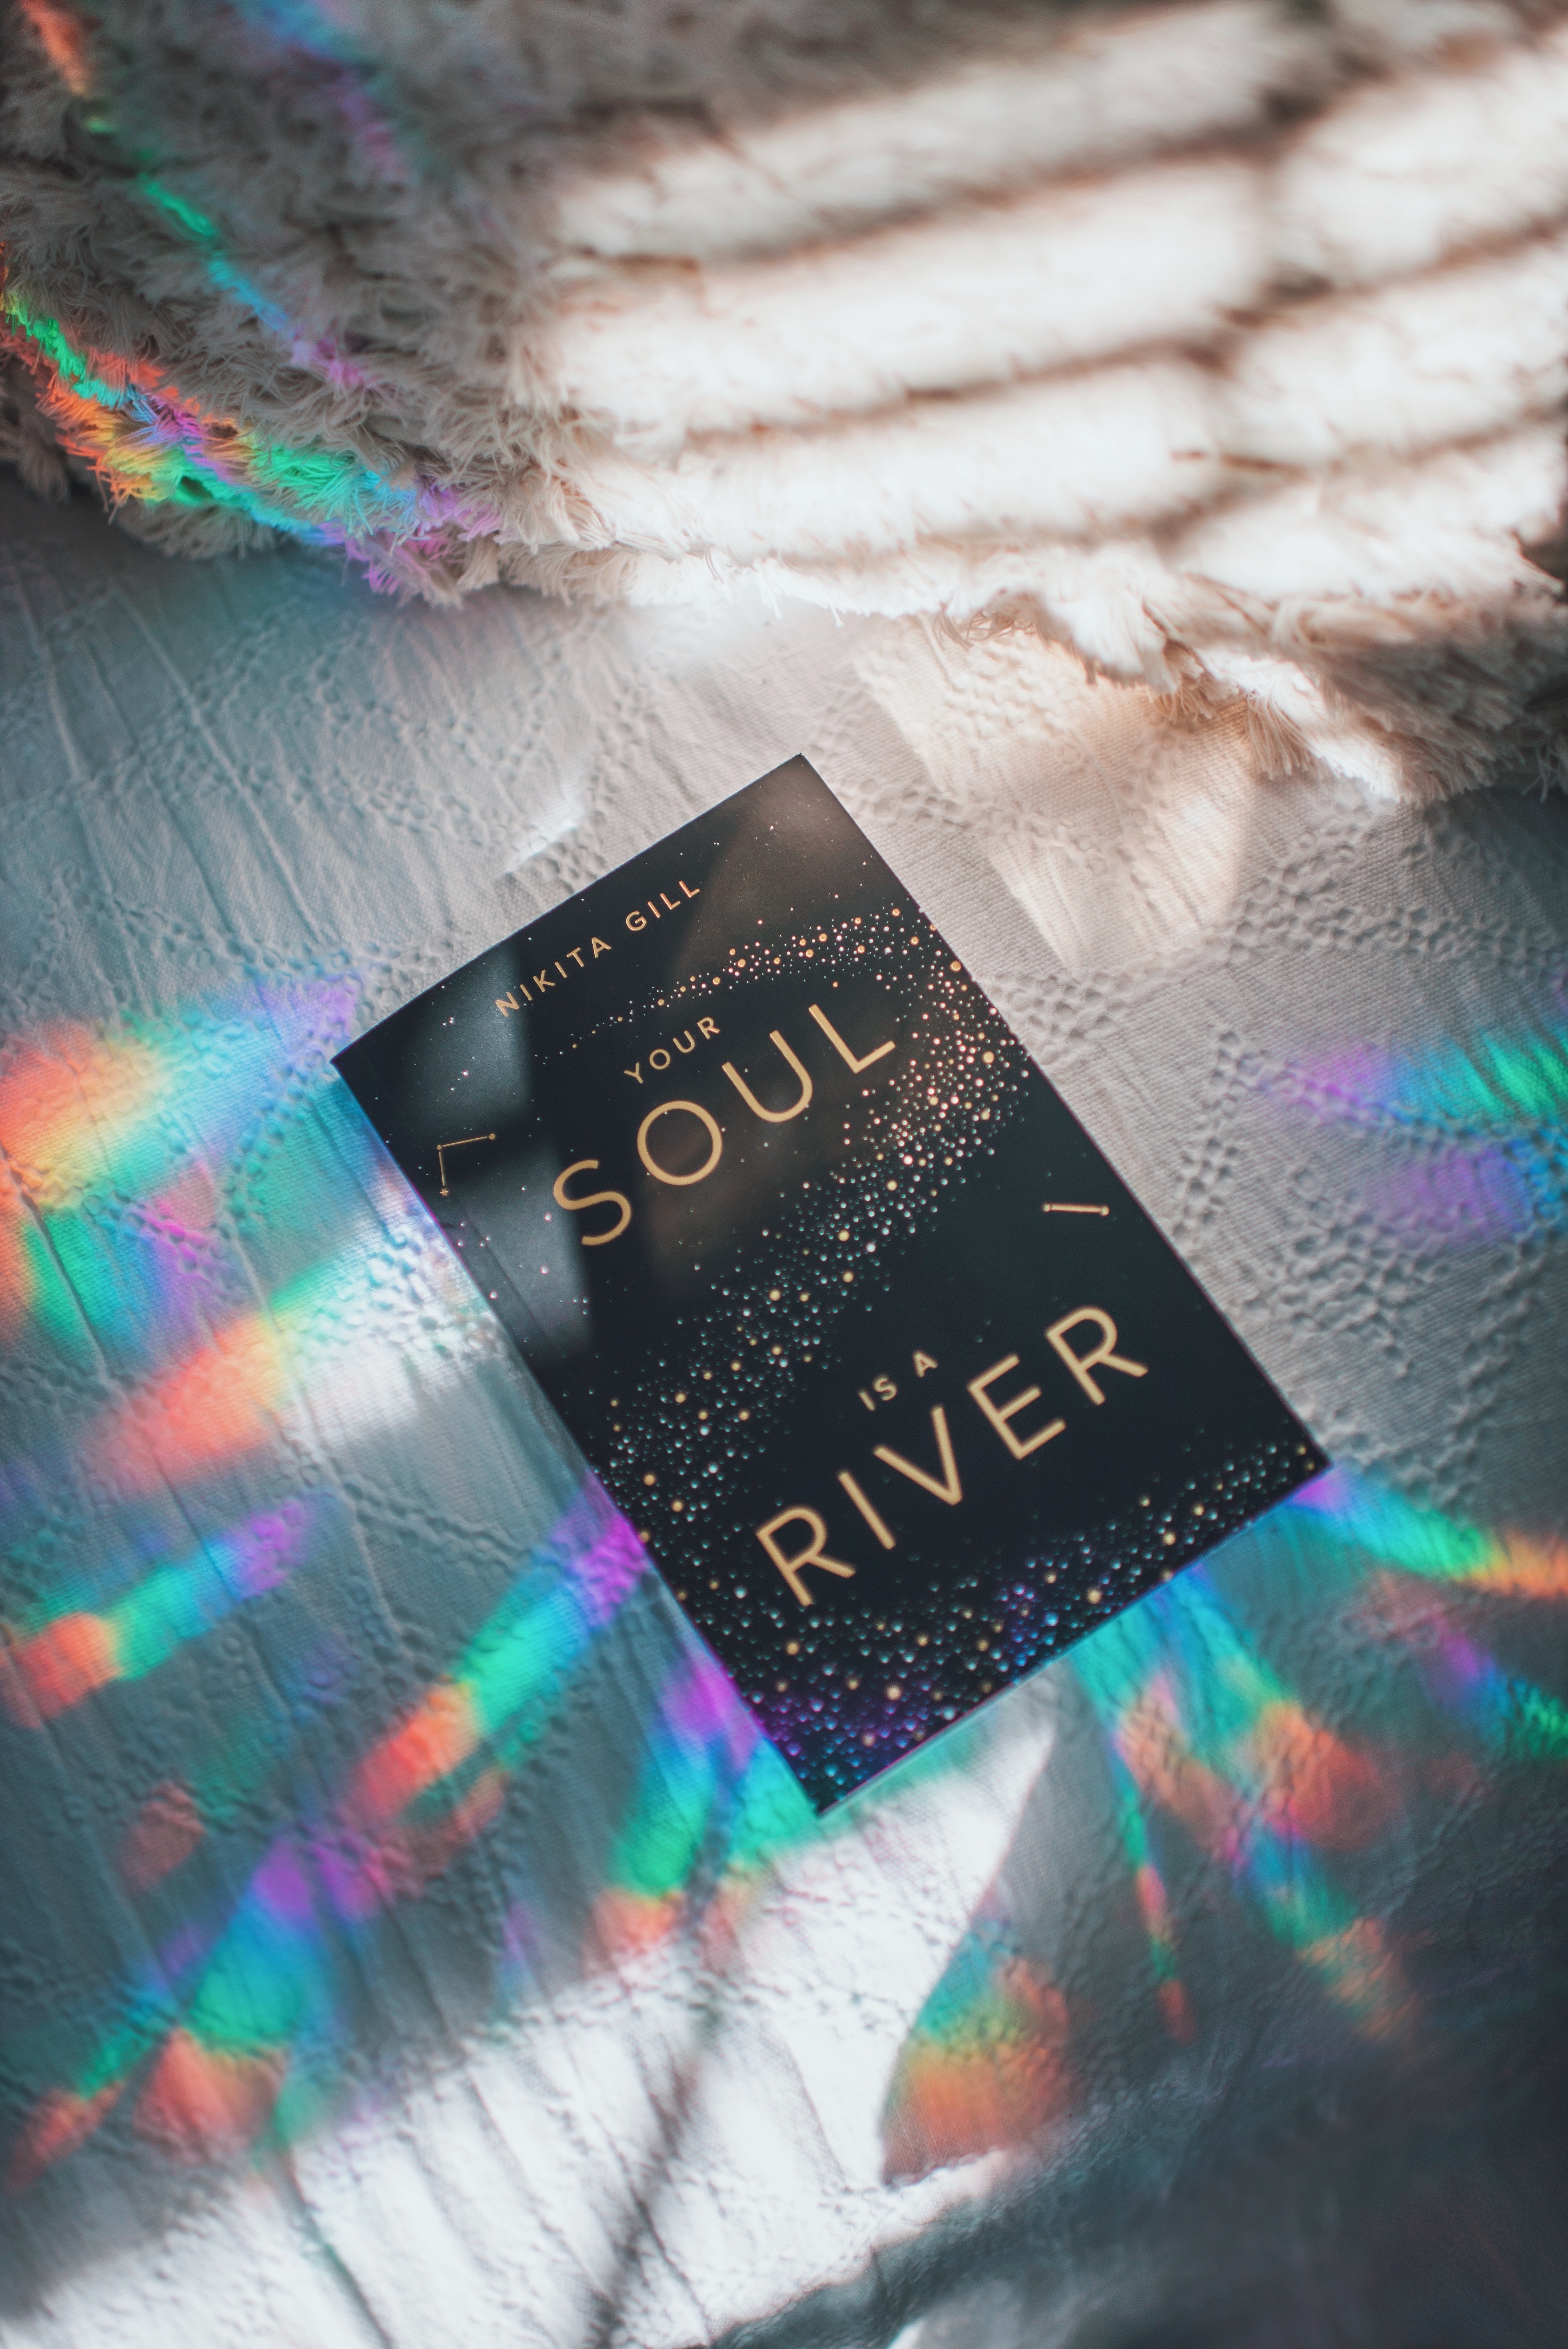 Your soul is a river by nikita gill book photo